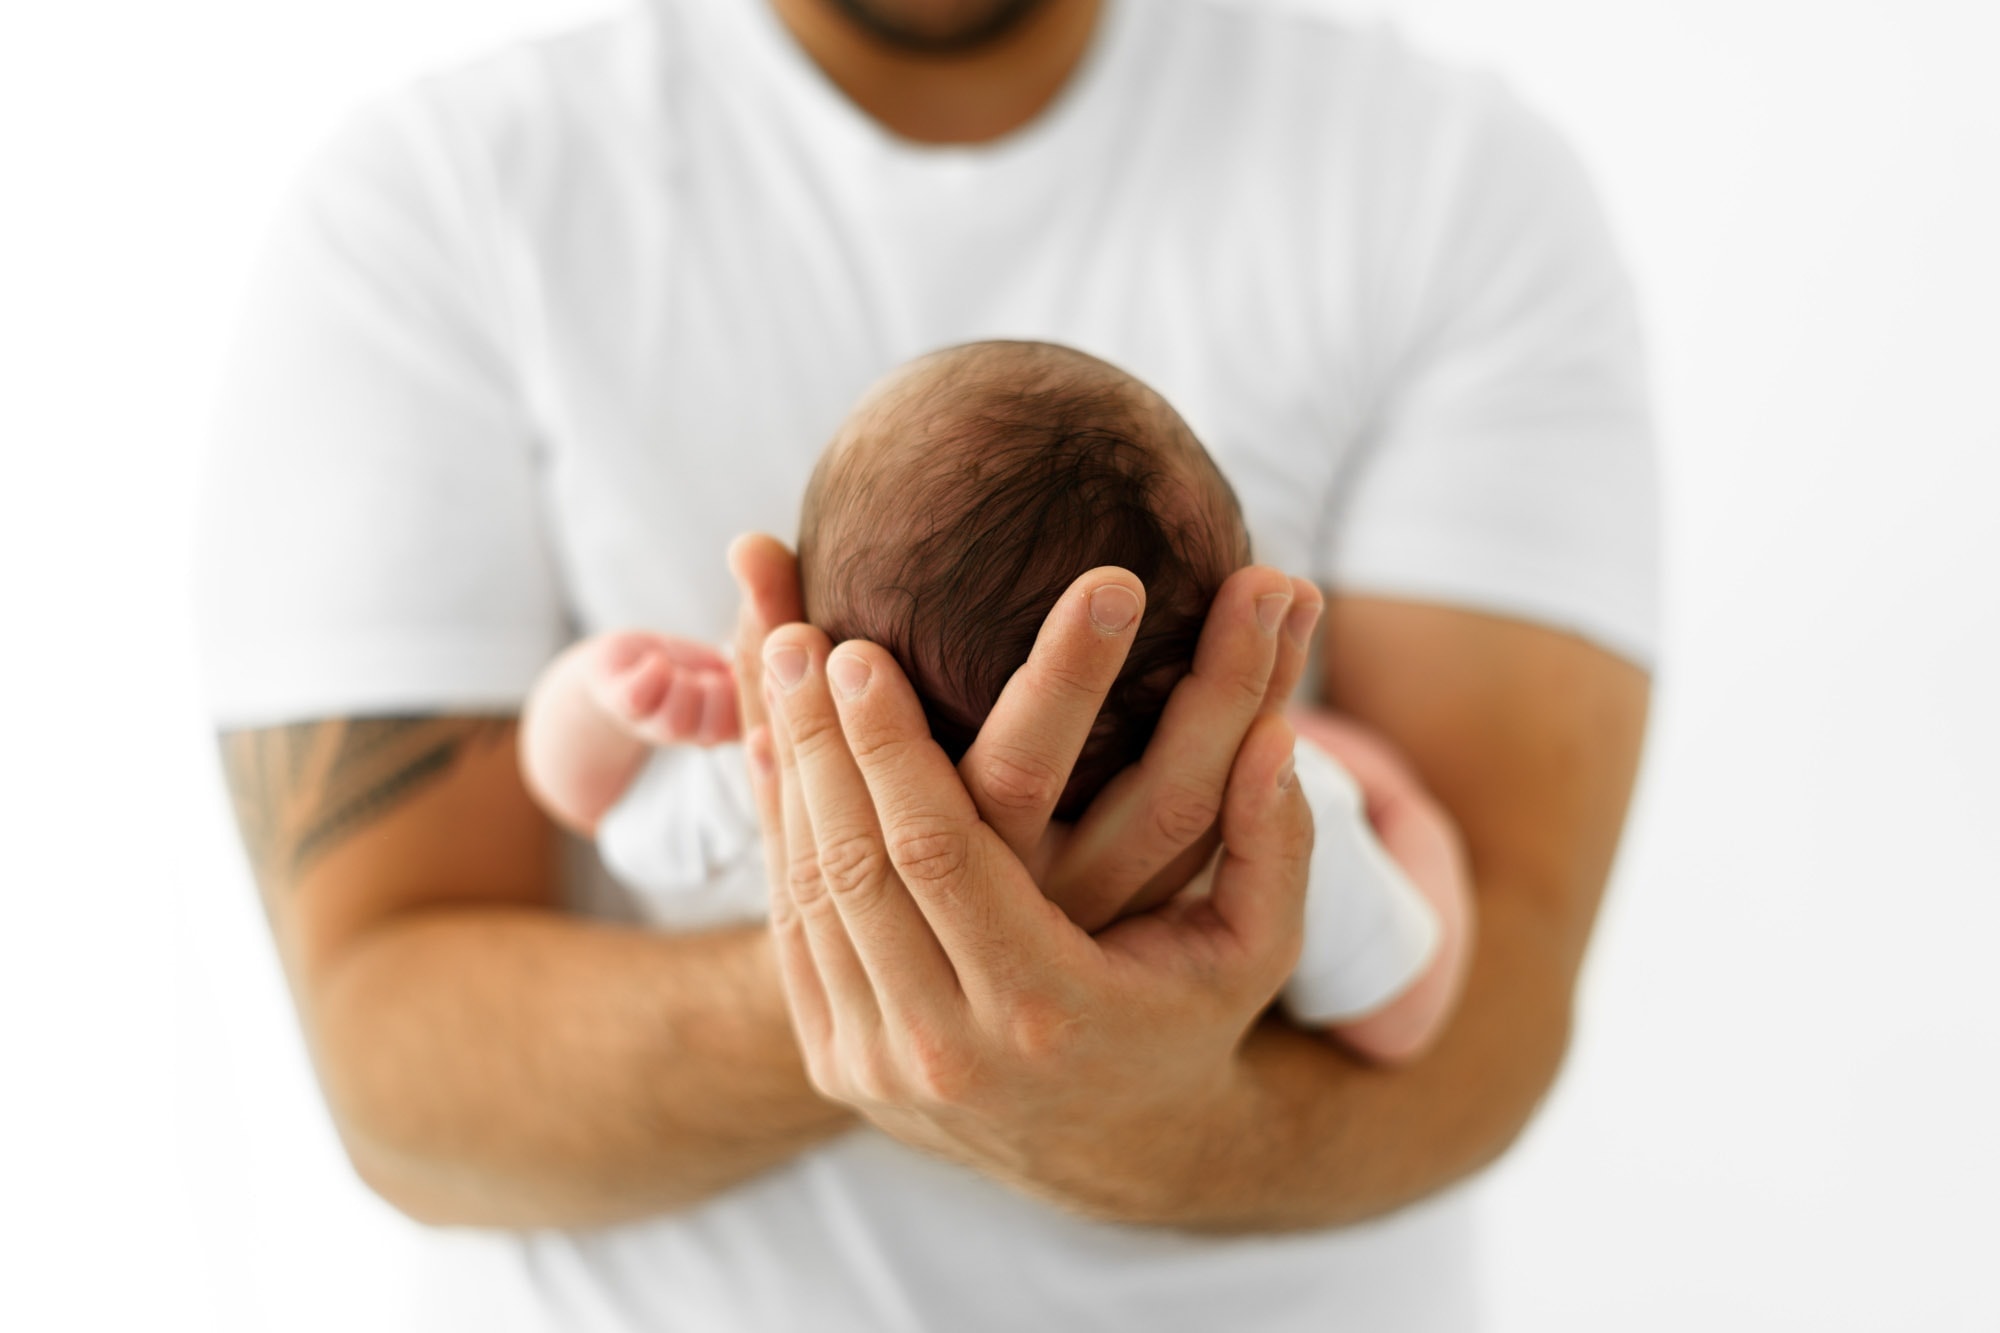 newbornb held in fathers hands toward camera during newborn photographer norwich session